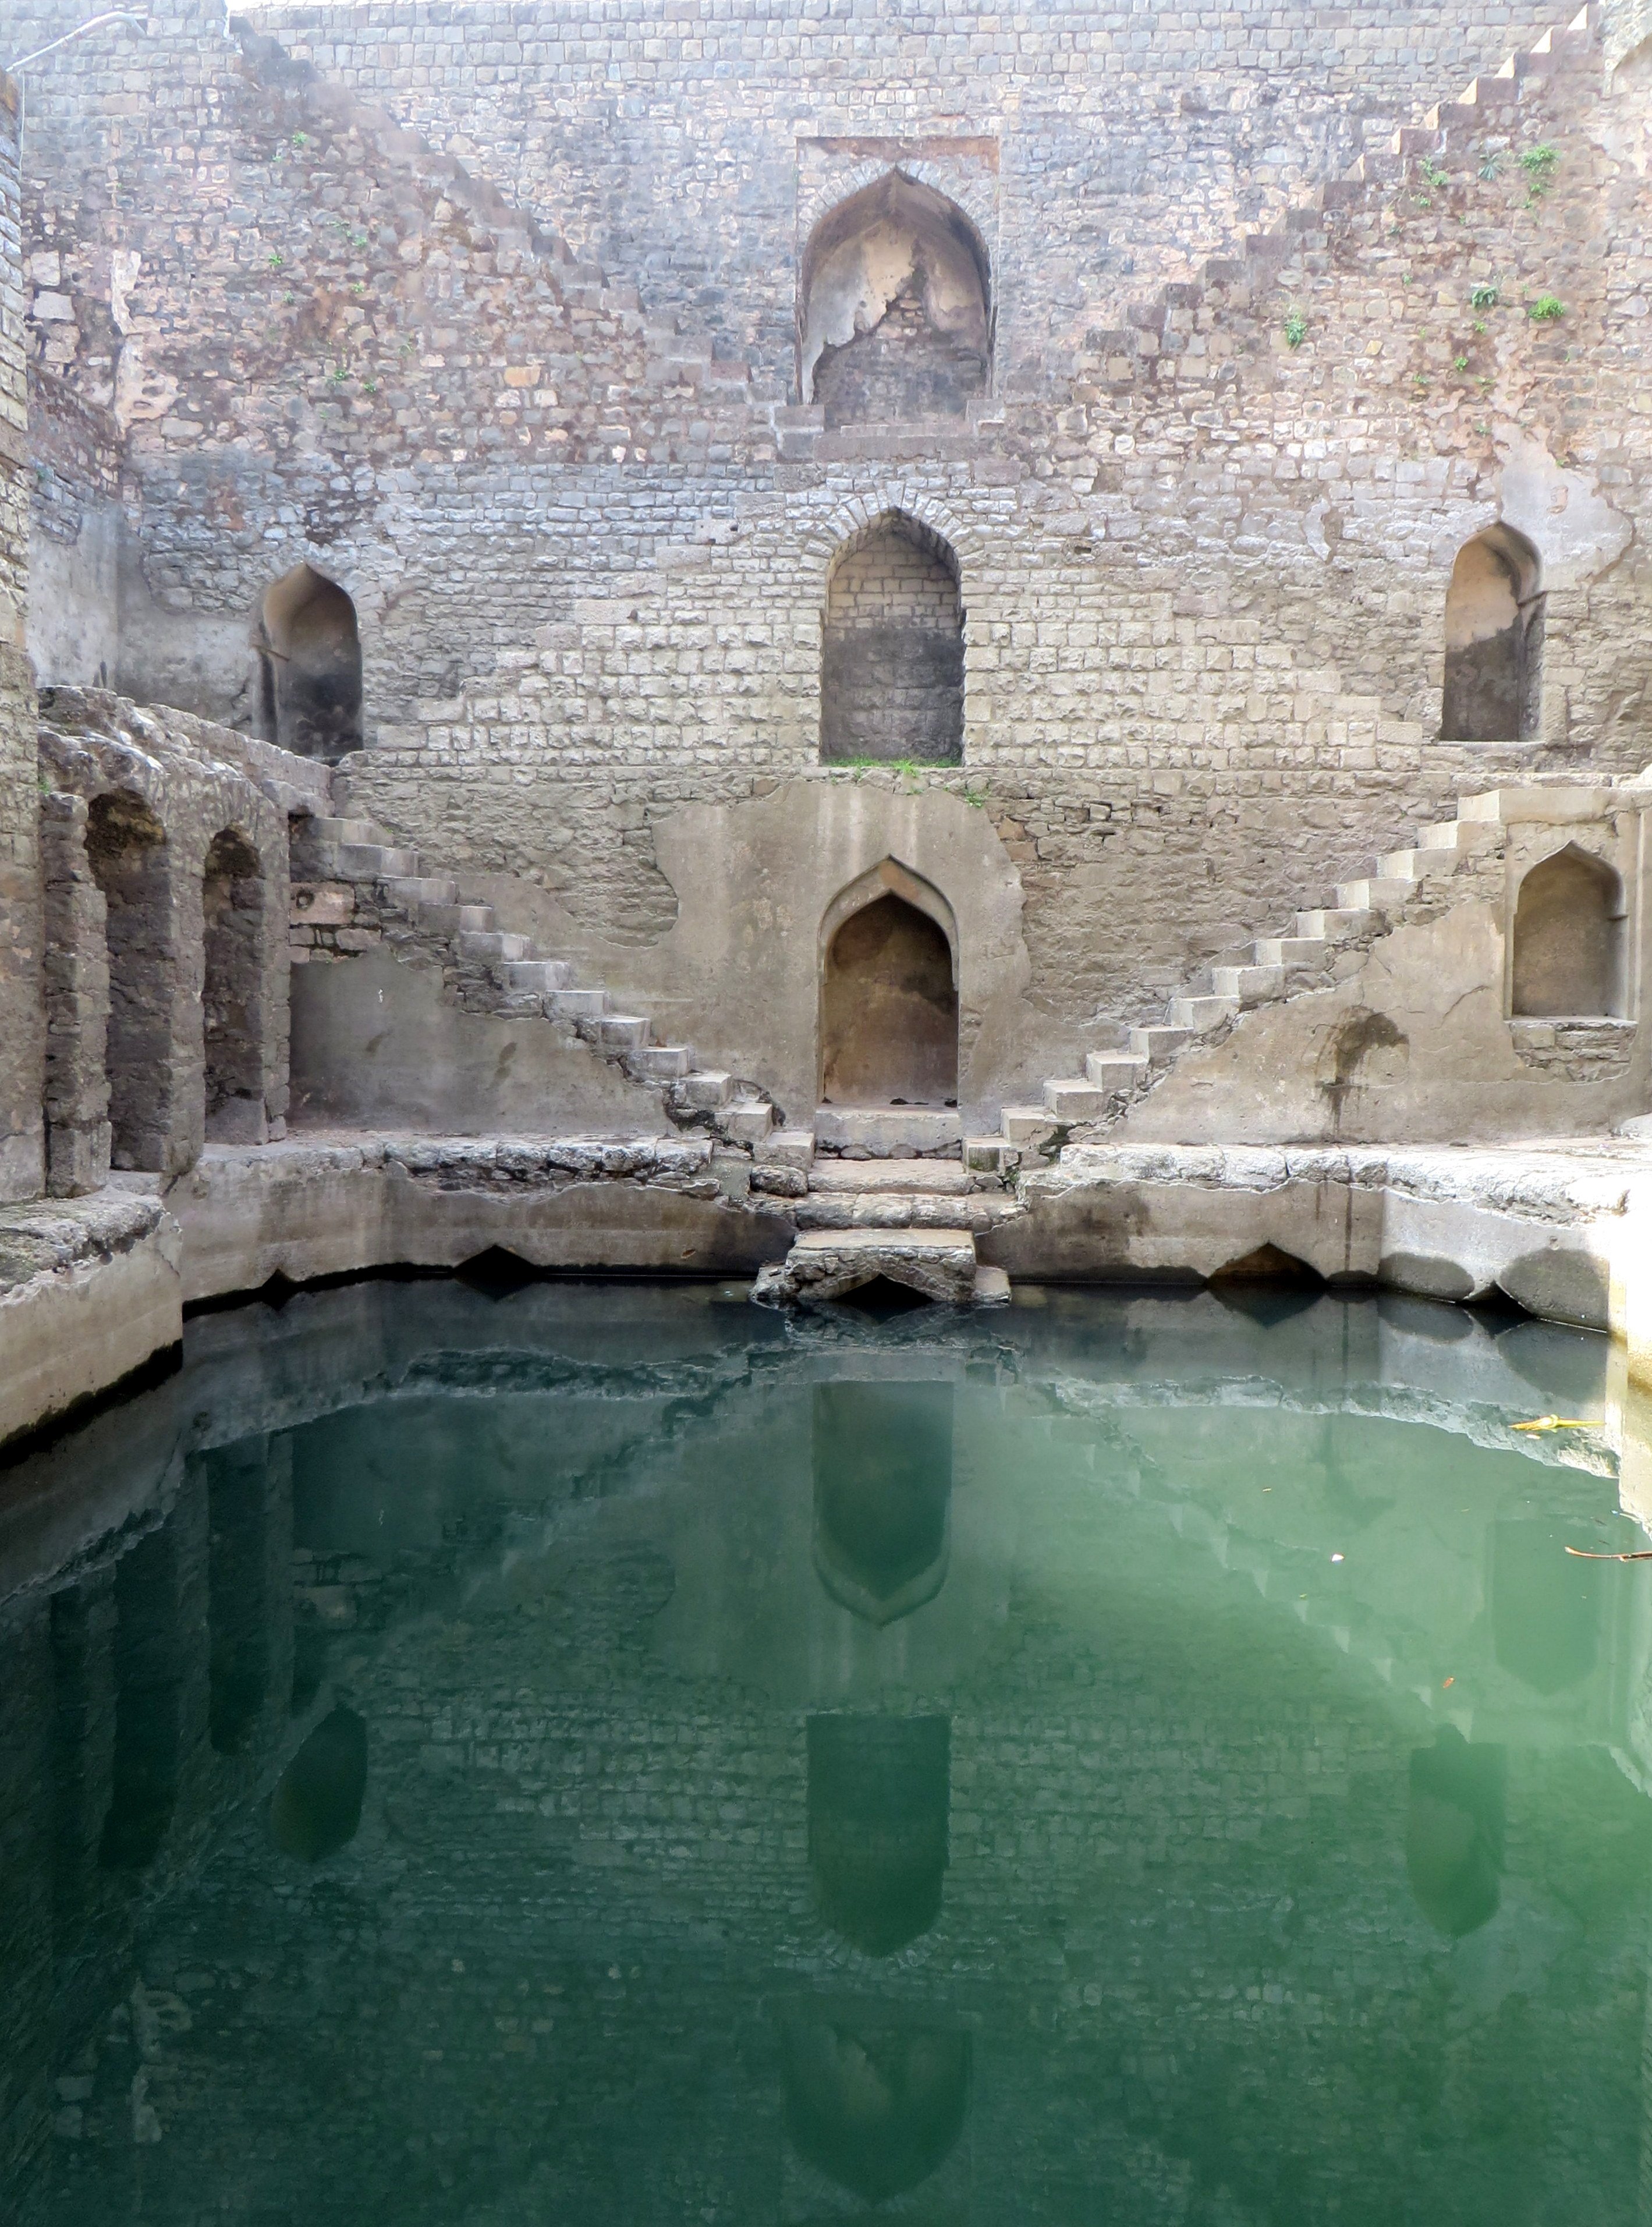 A pool at the base of an Indian stepwell